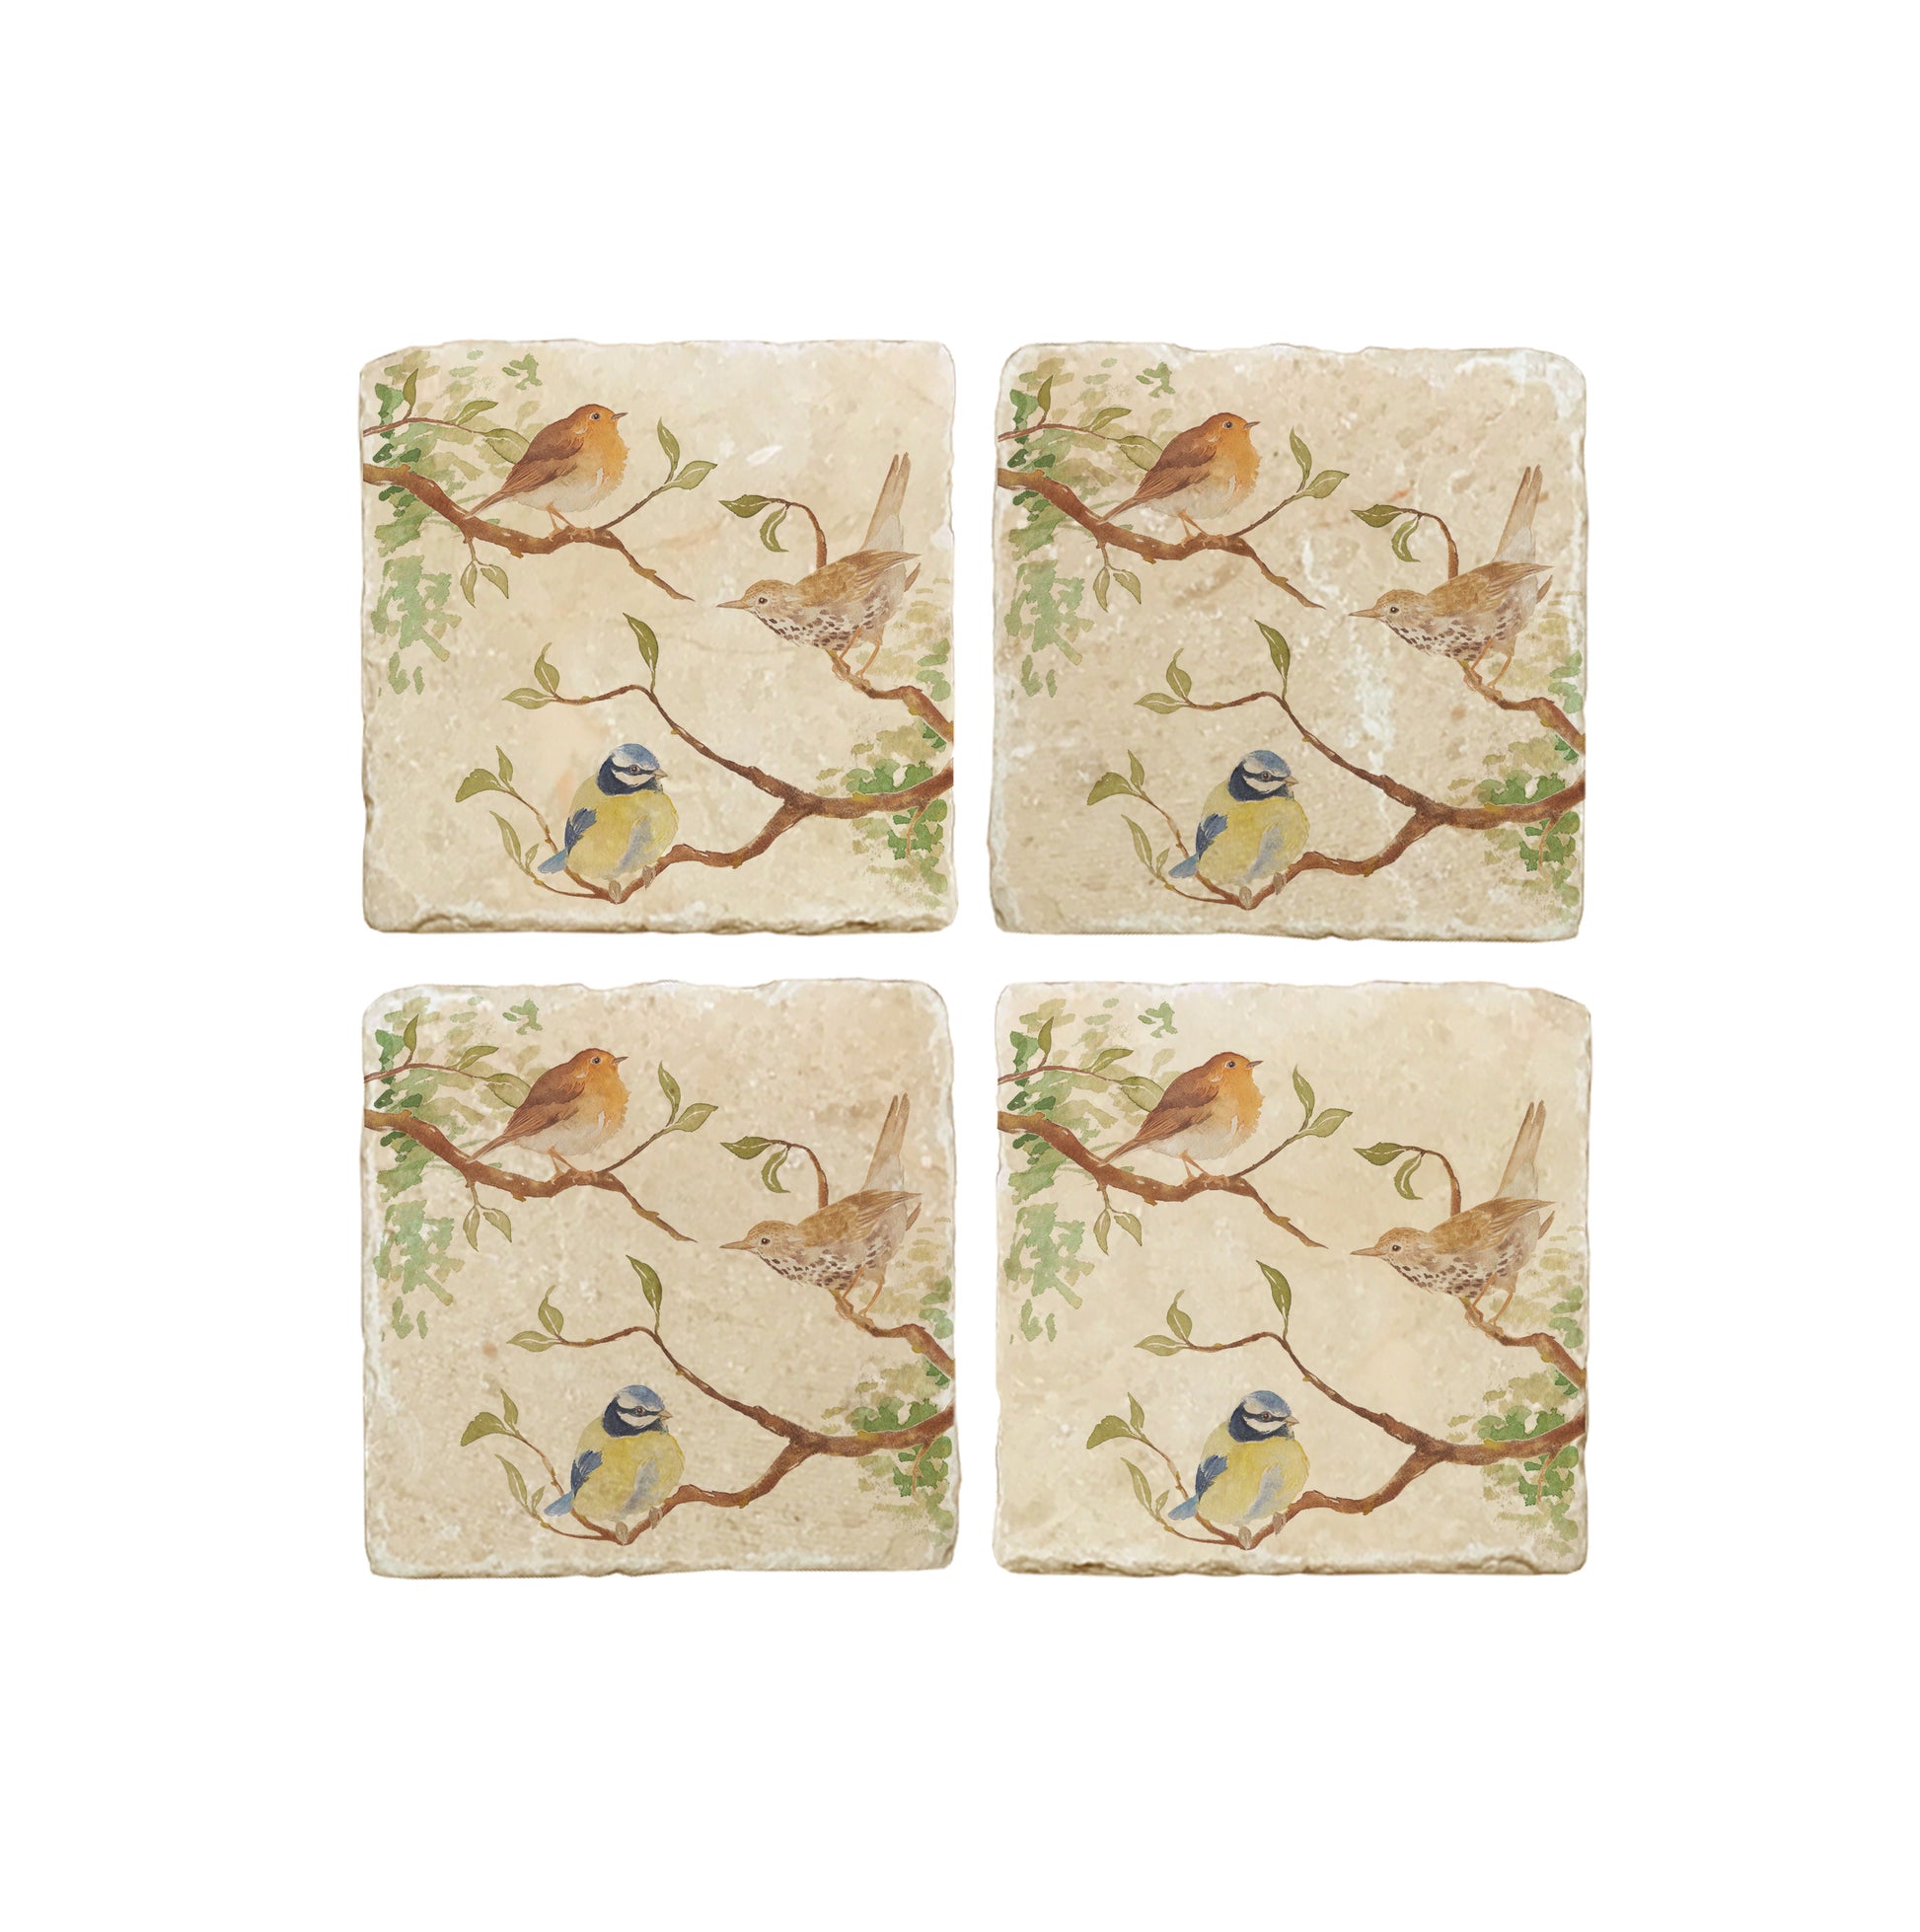 A set of 4 square marble coasters, featuring a watercolour design of British garden birds in the hedgerow around a paddock gate.